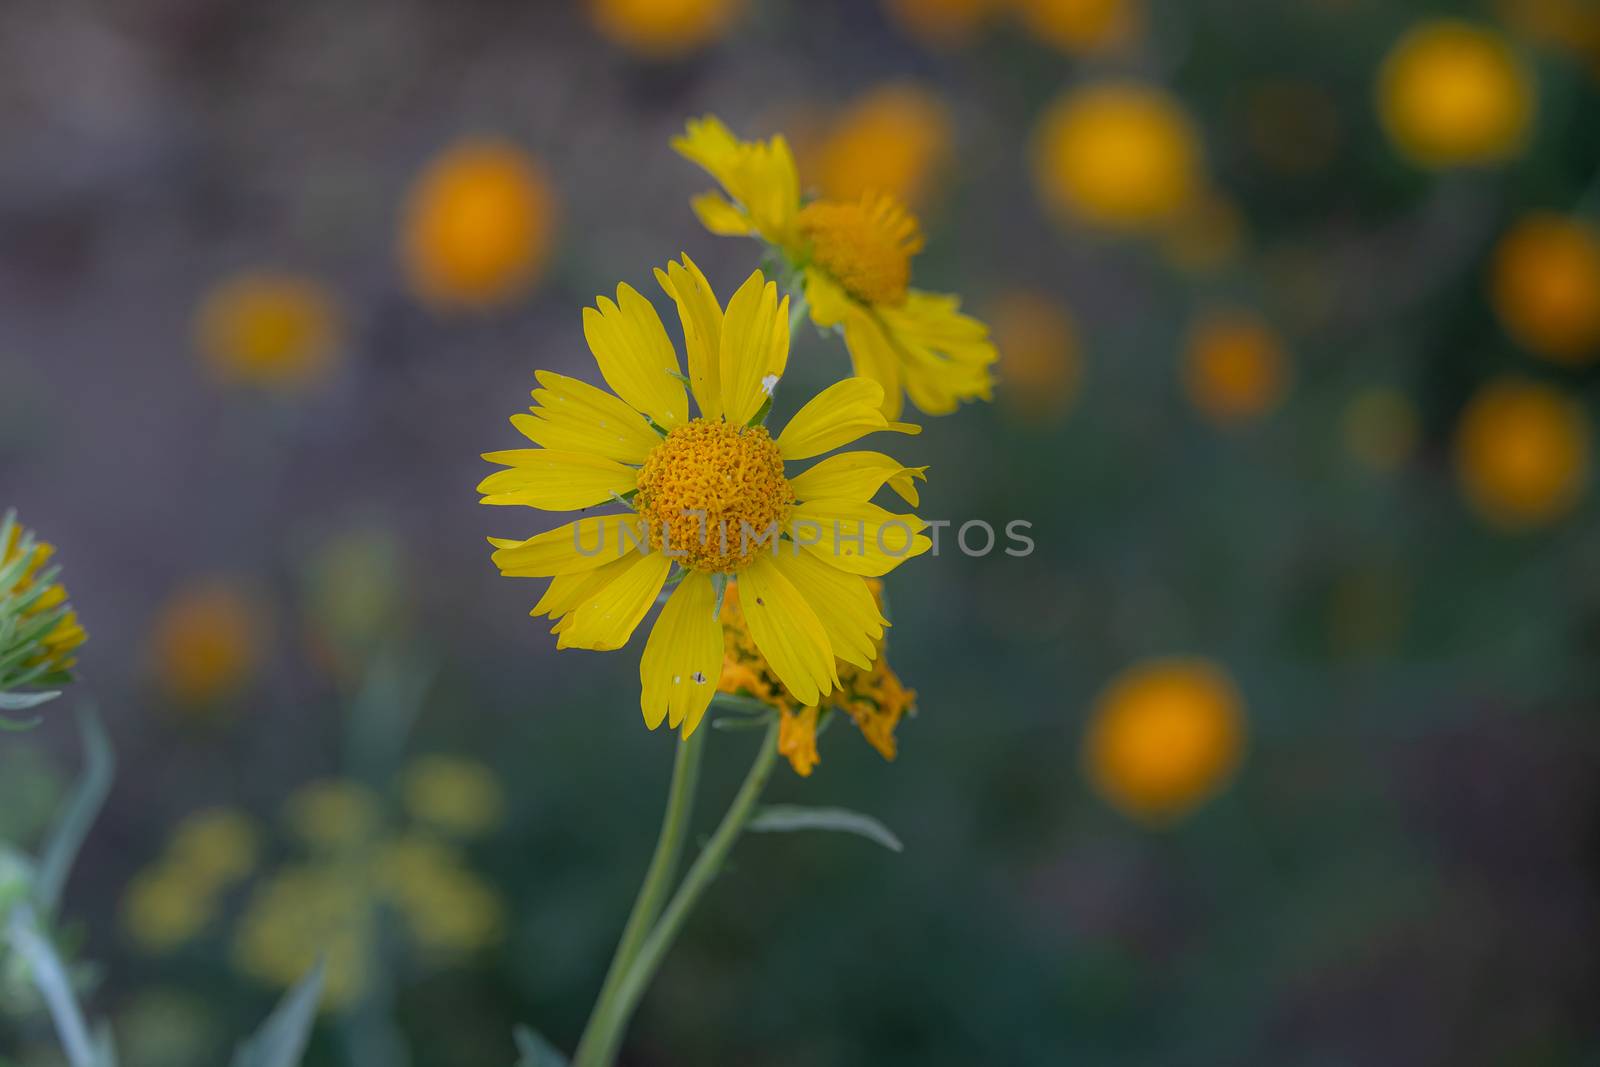 A blend of soft focus and vintage effect on native sunflower in winter by 9500102400